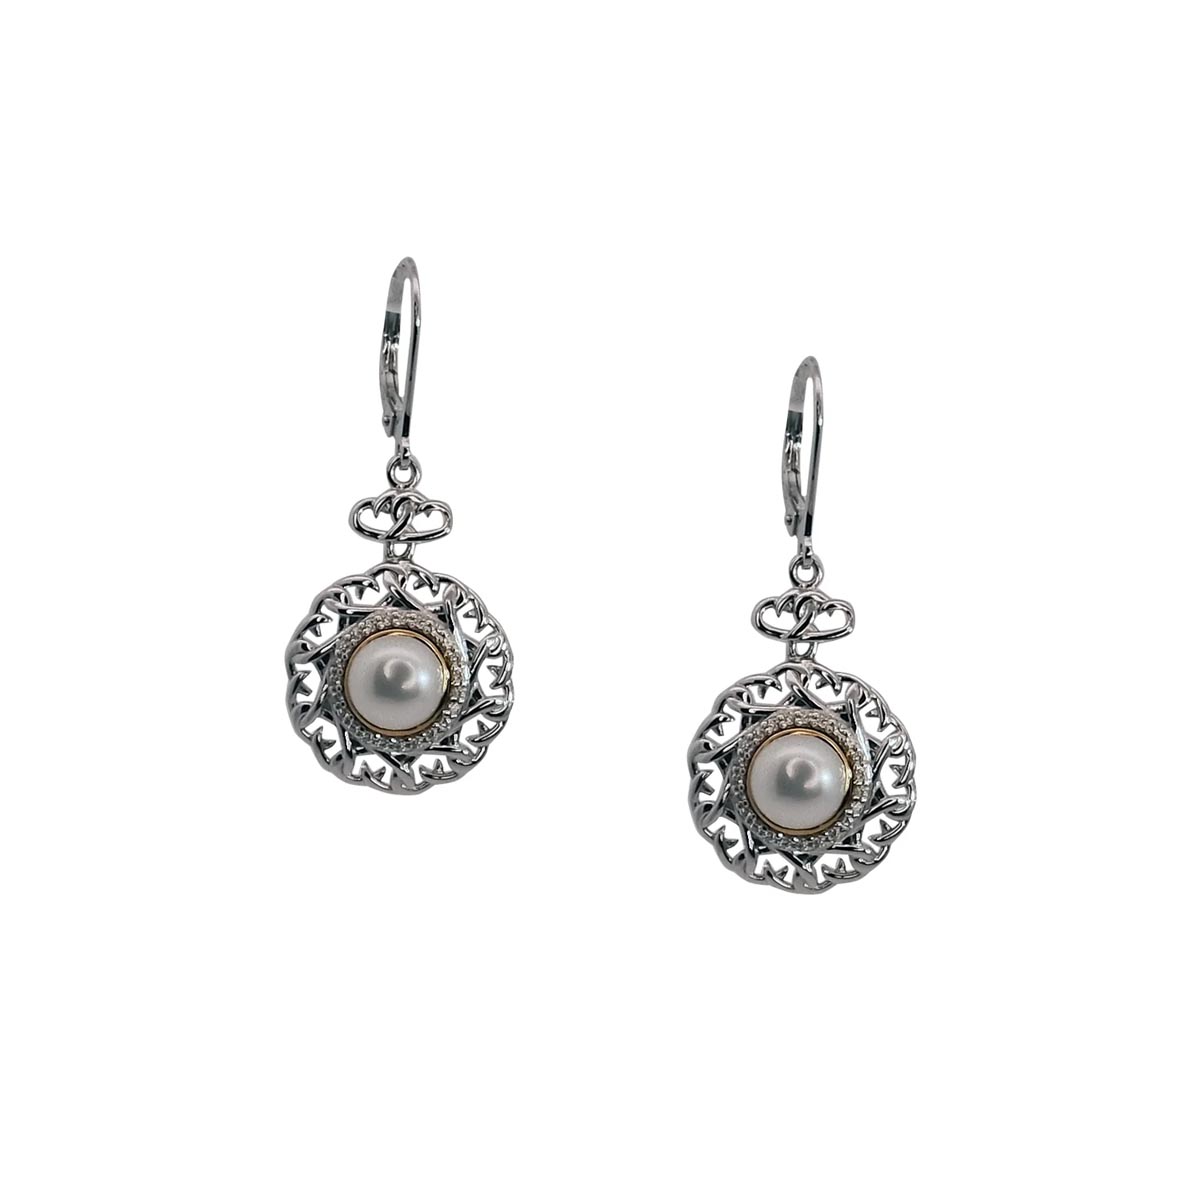 Keith Jack Aphrodite Cultured Freshwater Pearl Drop Earrings in Sterling Silver and 10kt Yellow Gold with Cubic Zirconia (6.5mm pearls)